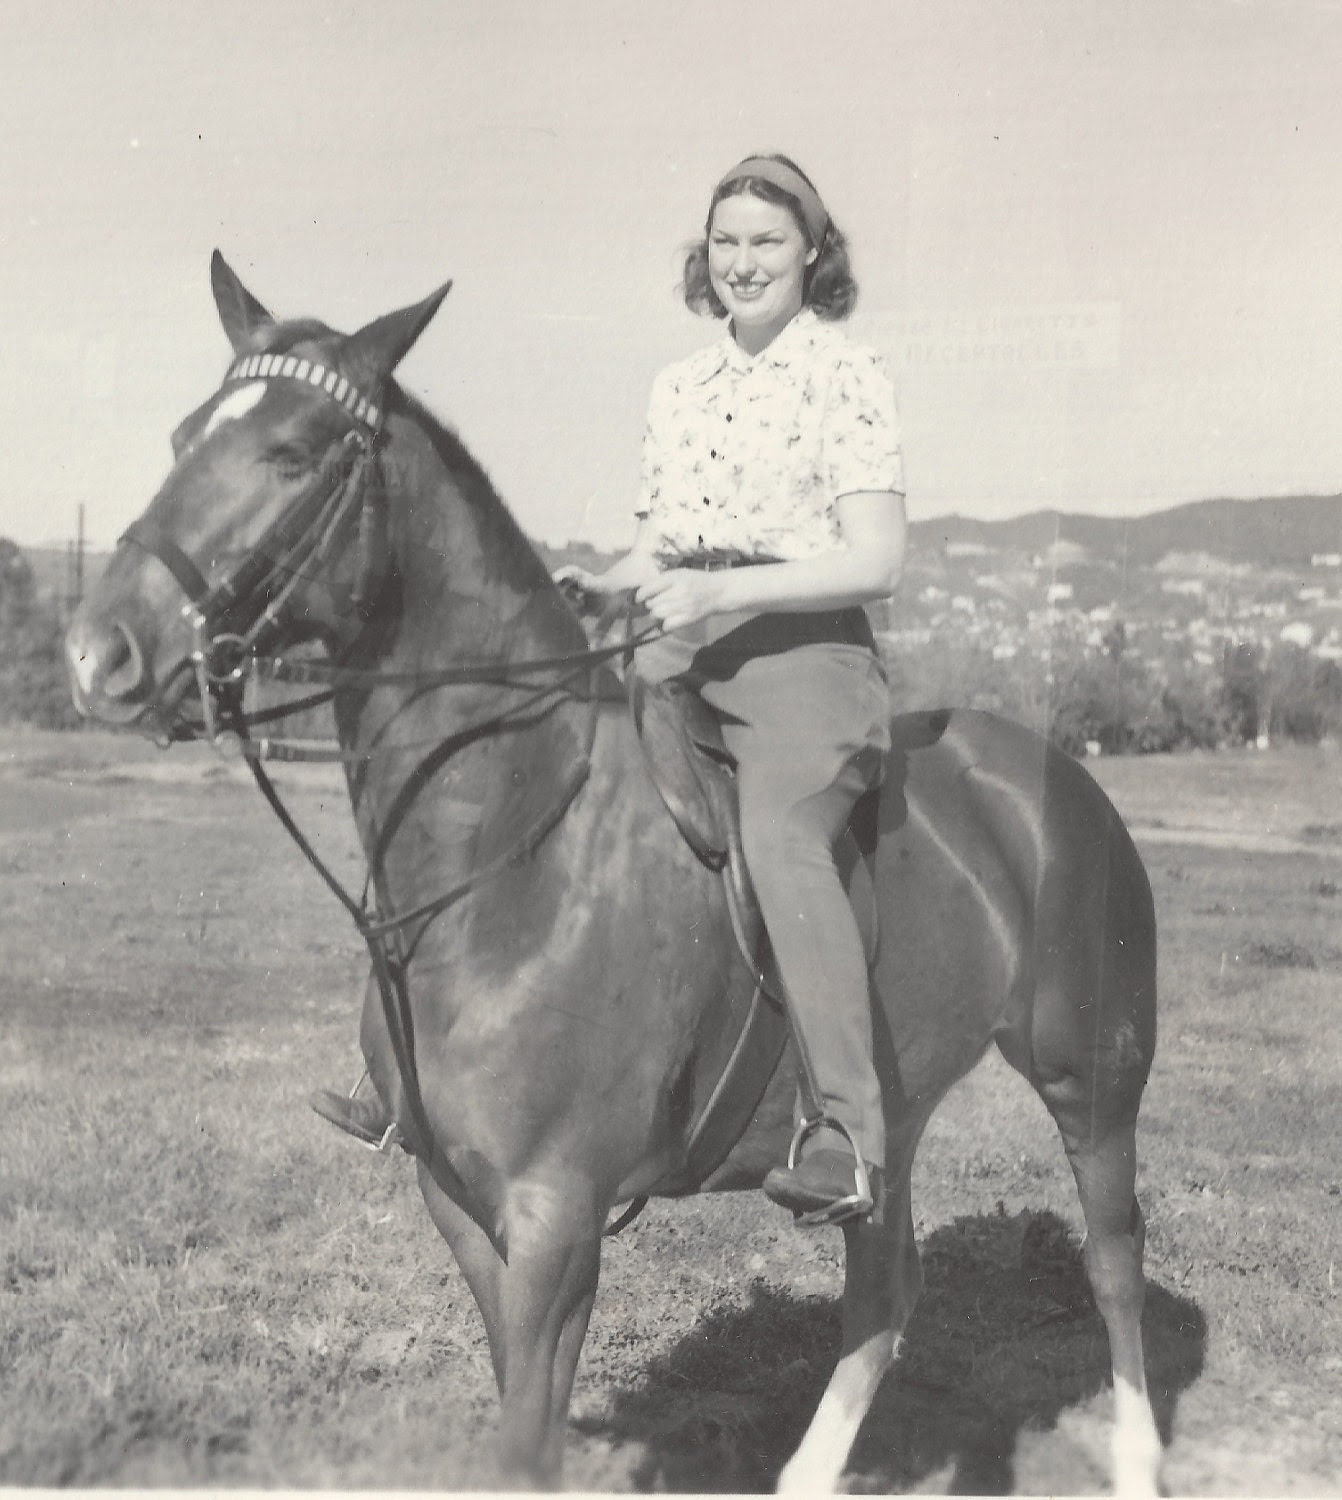 Vintage 1940s Horse Photograph, girl on horse